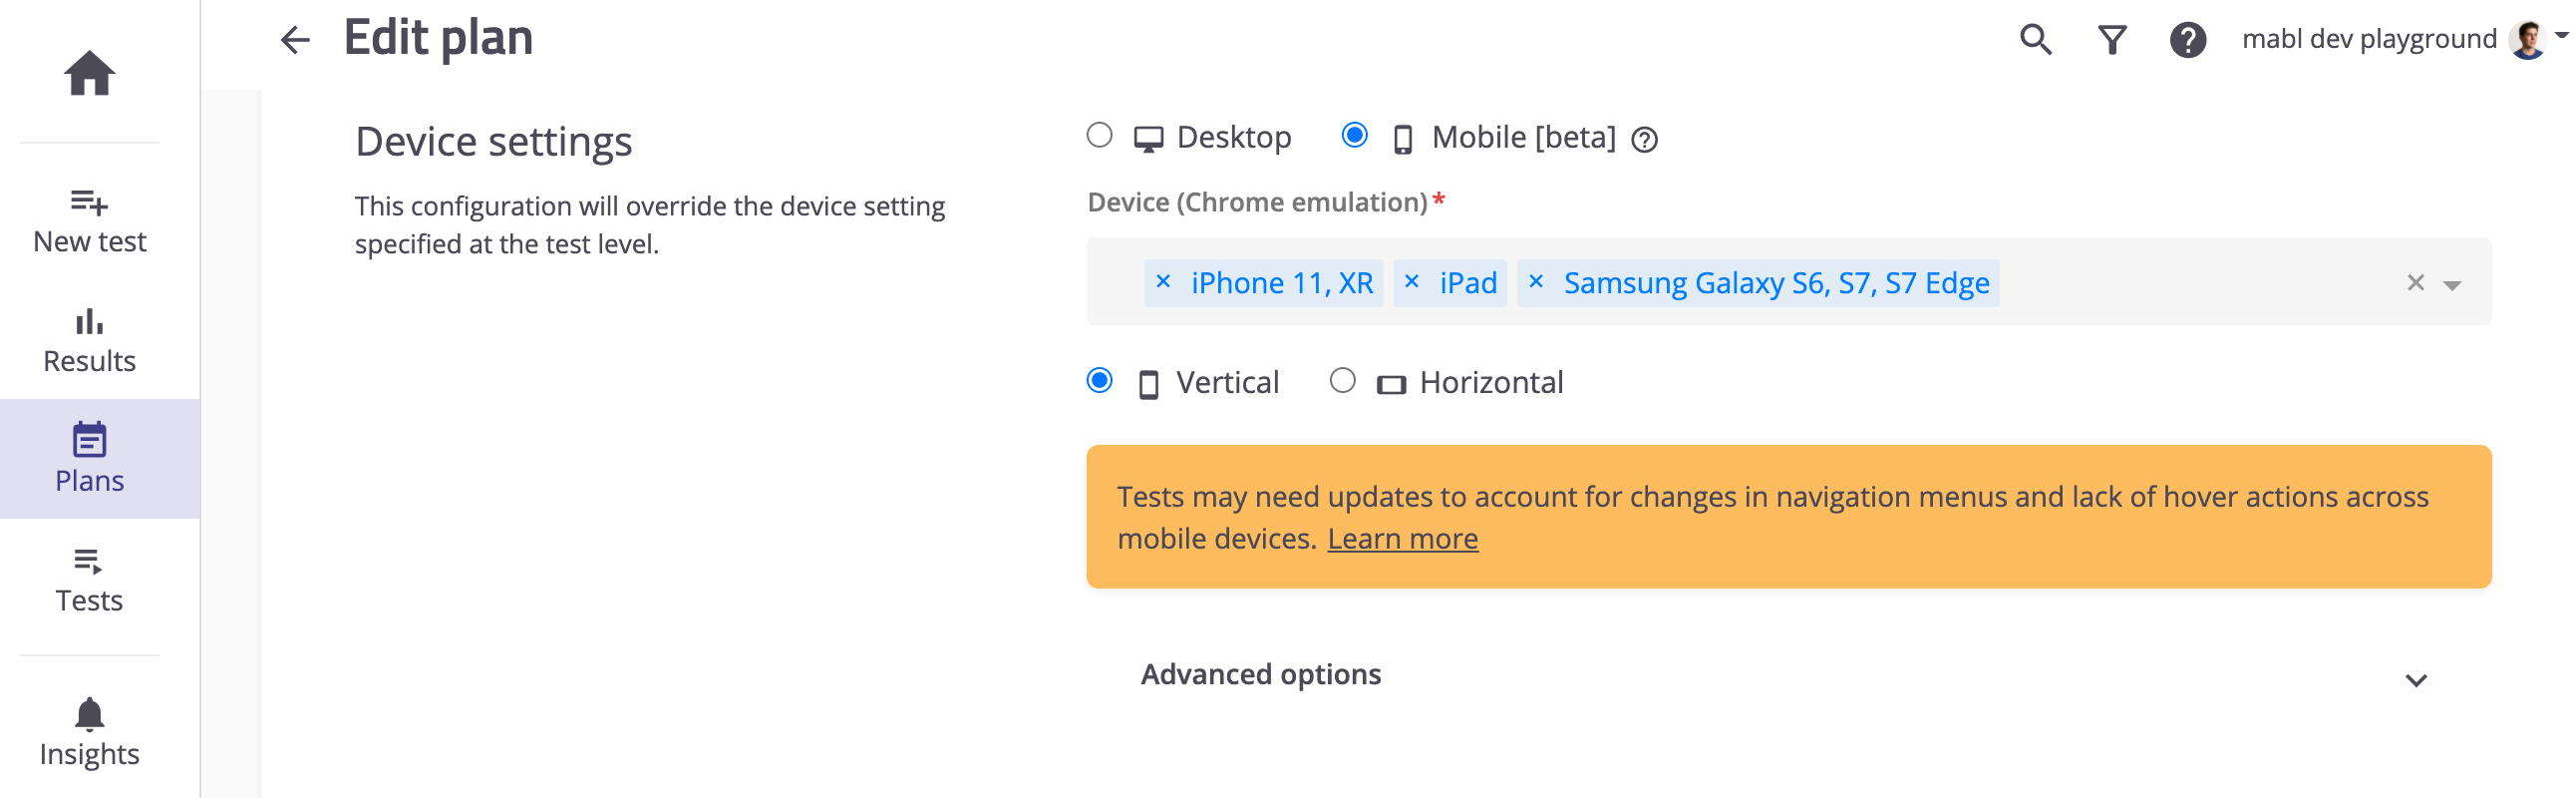 Configuring mobile device settings for a plan.